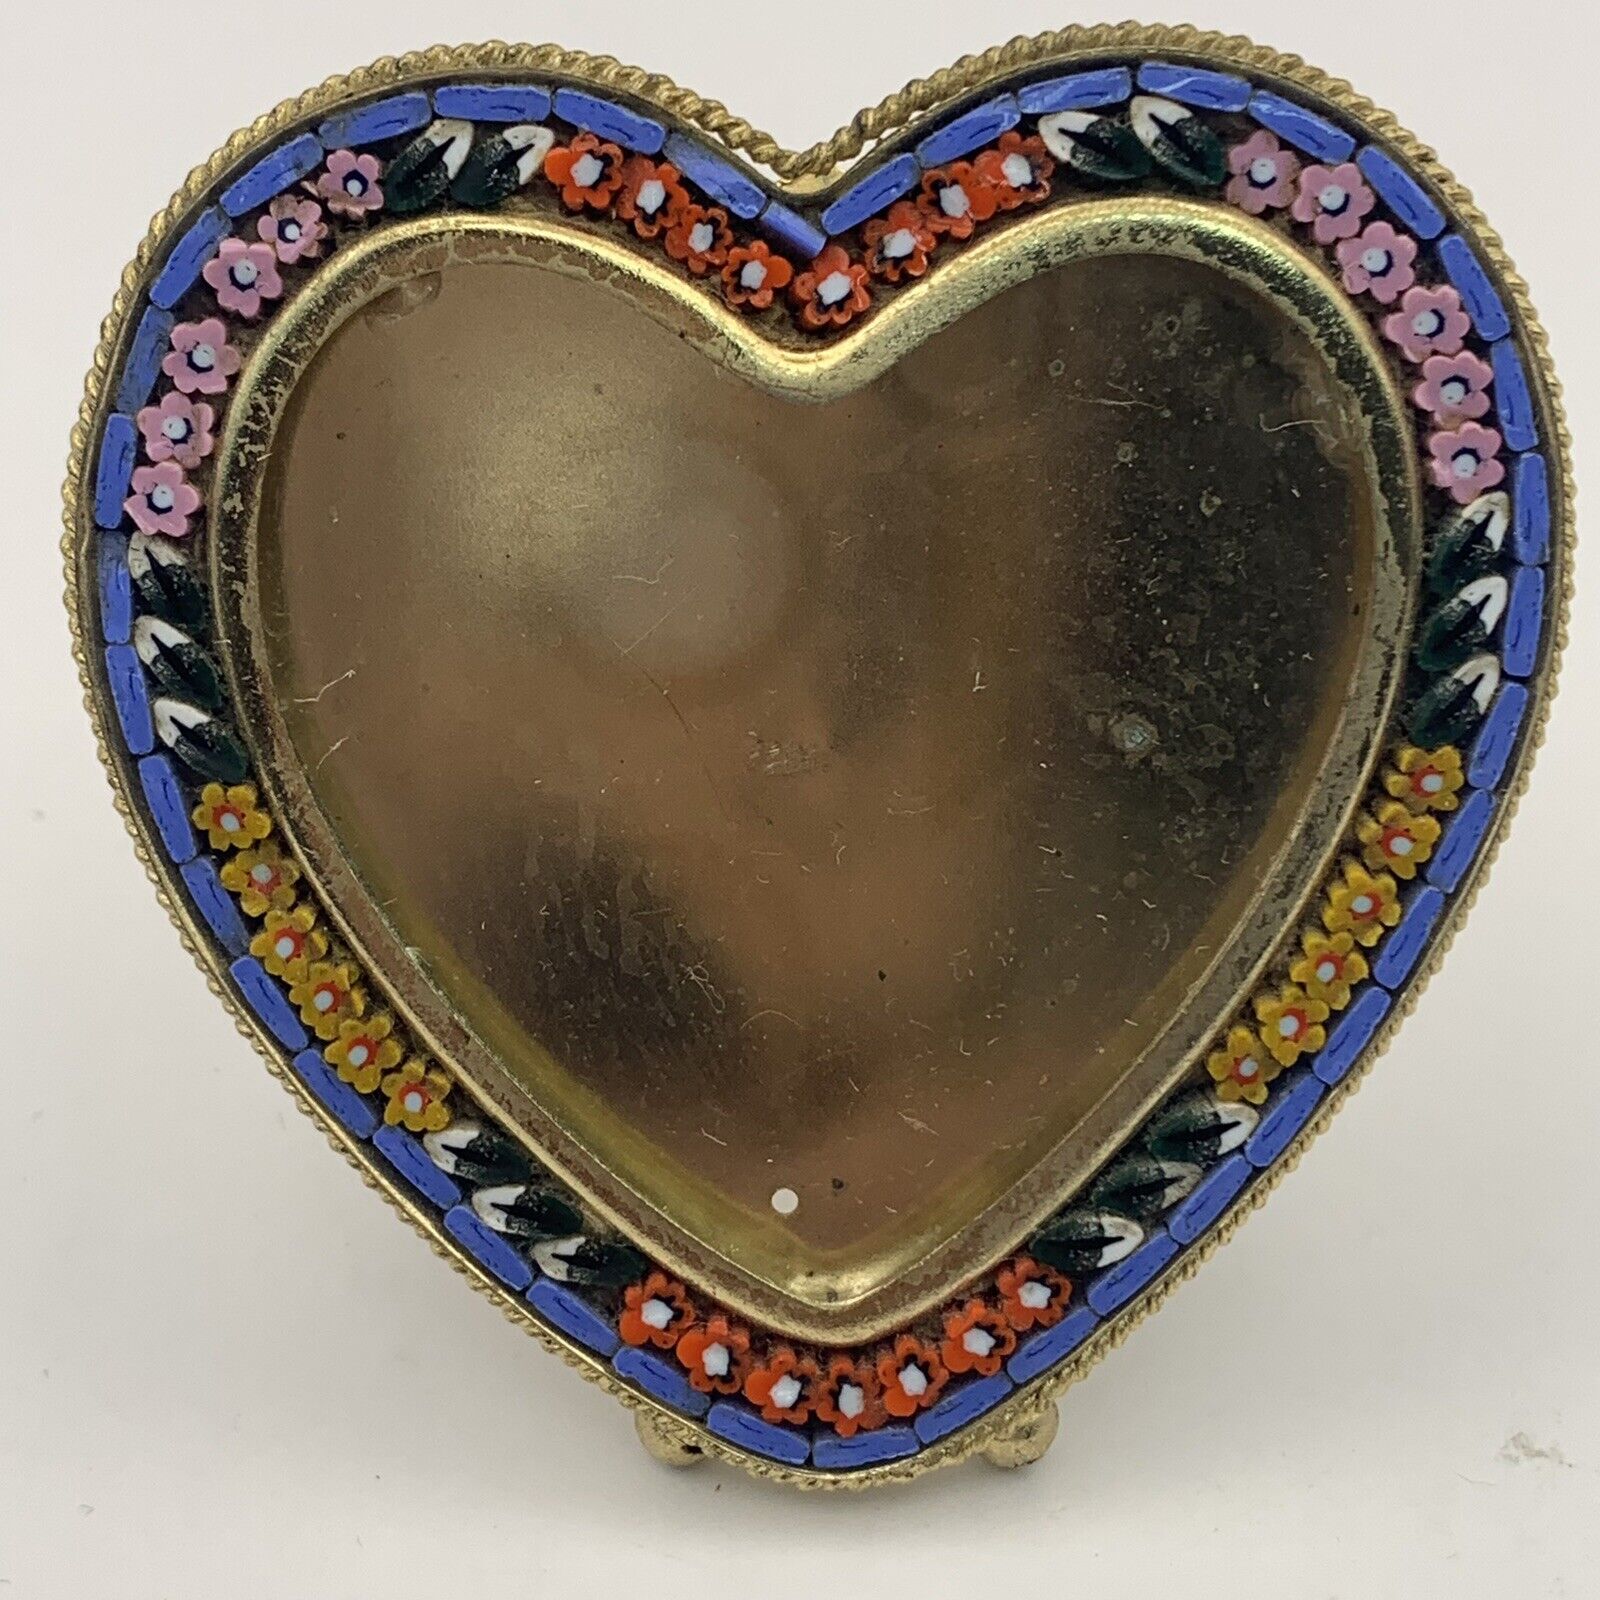 VINTAGE ITALY MINI MICRO MOSAIC EASEL BACK HEART SHAPE PICTURE FRAME GC